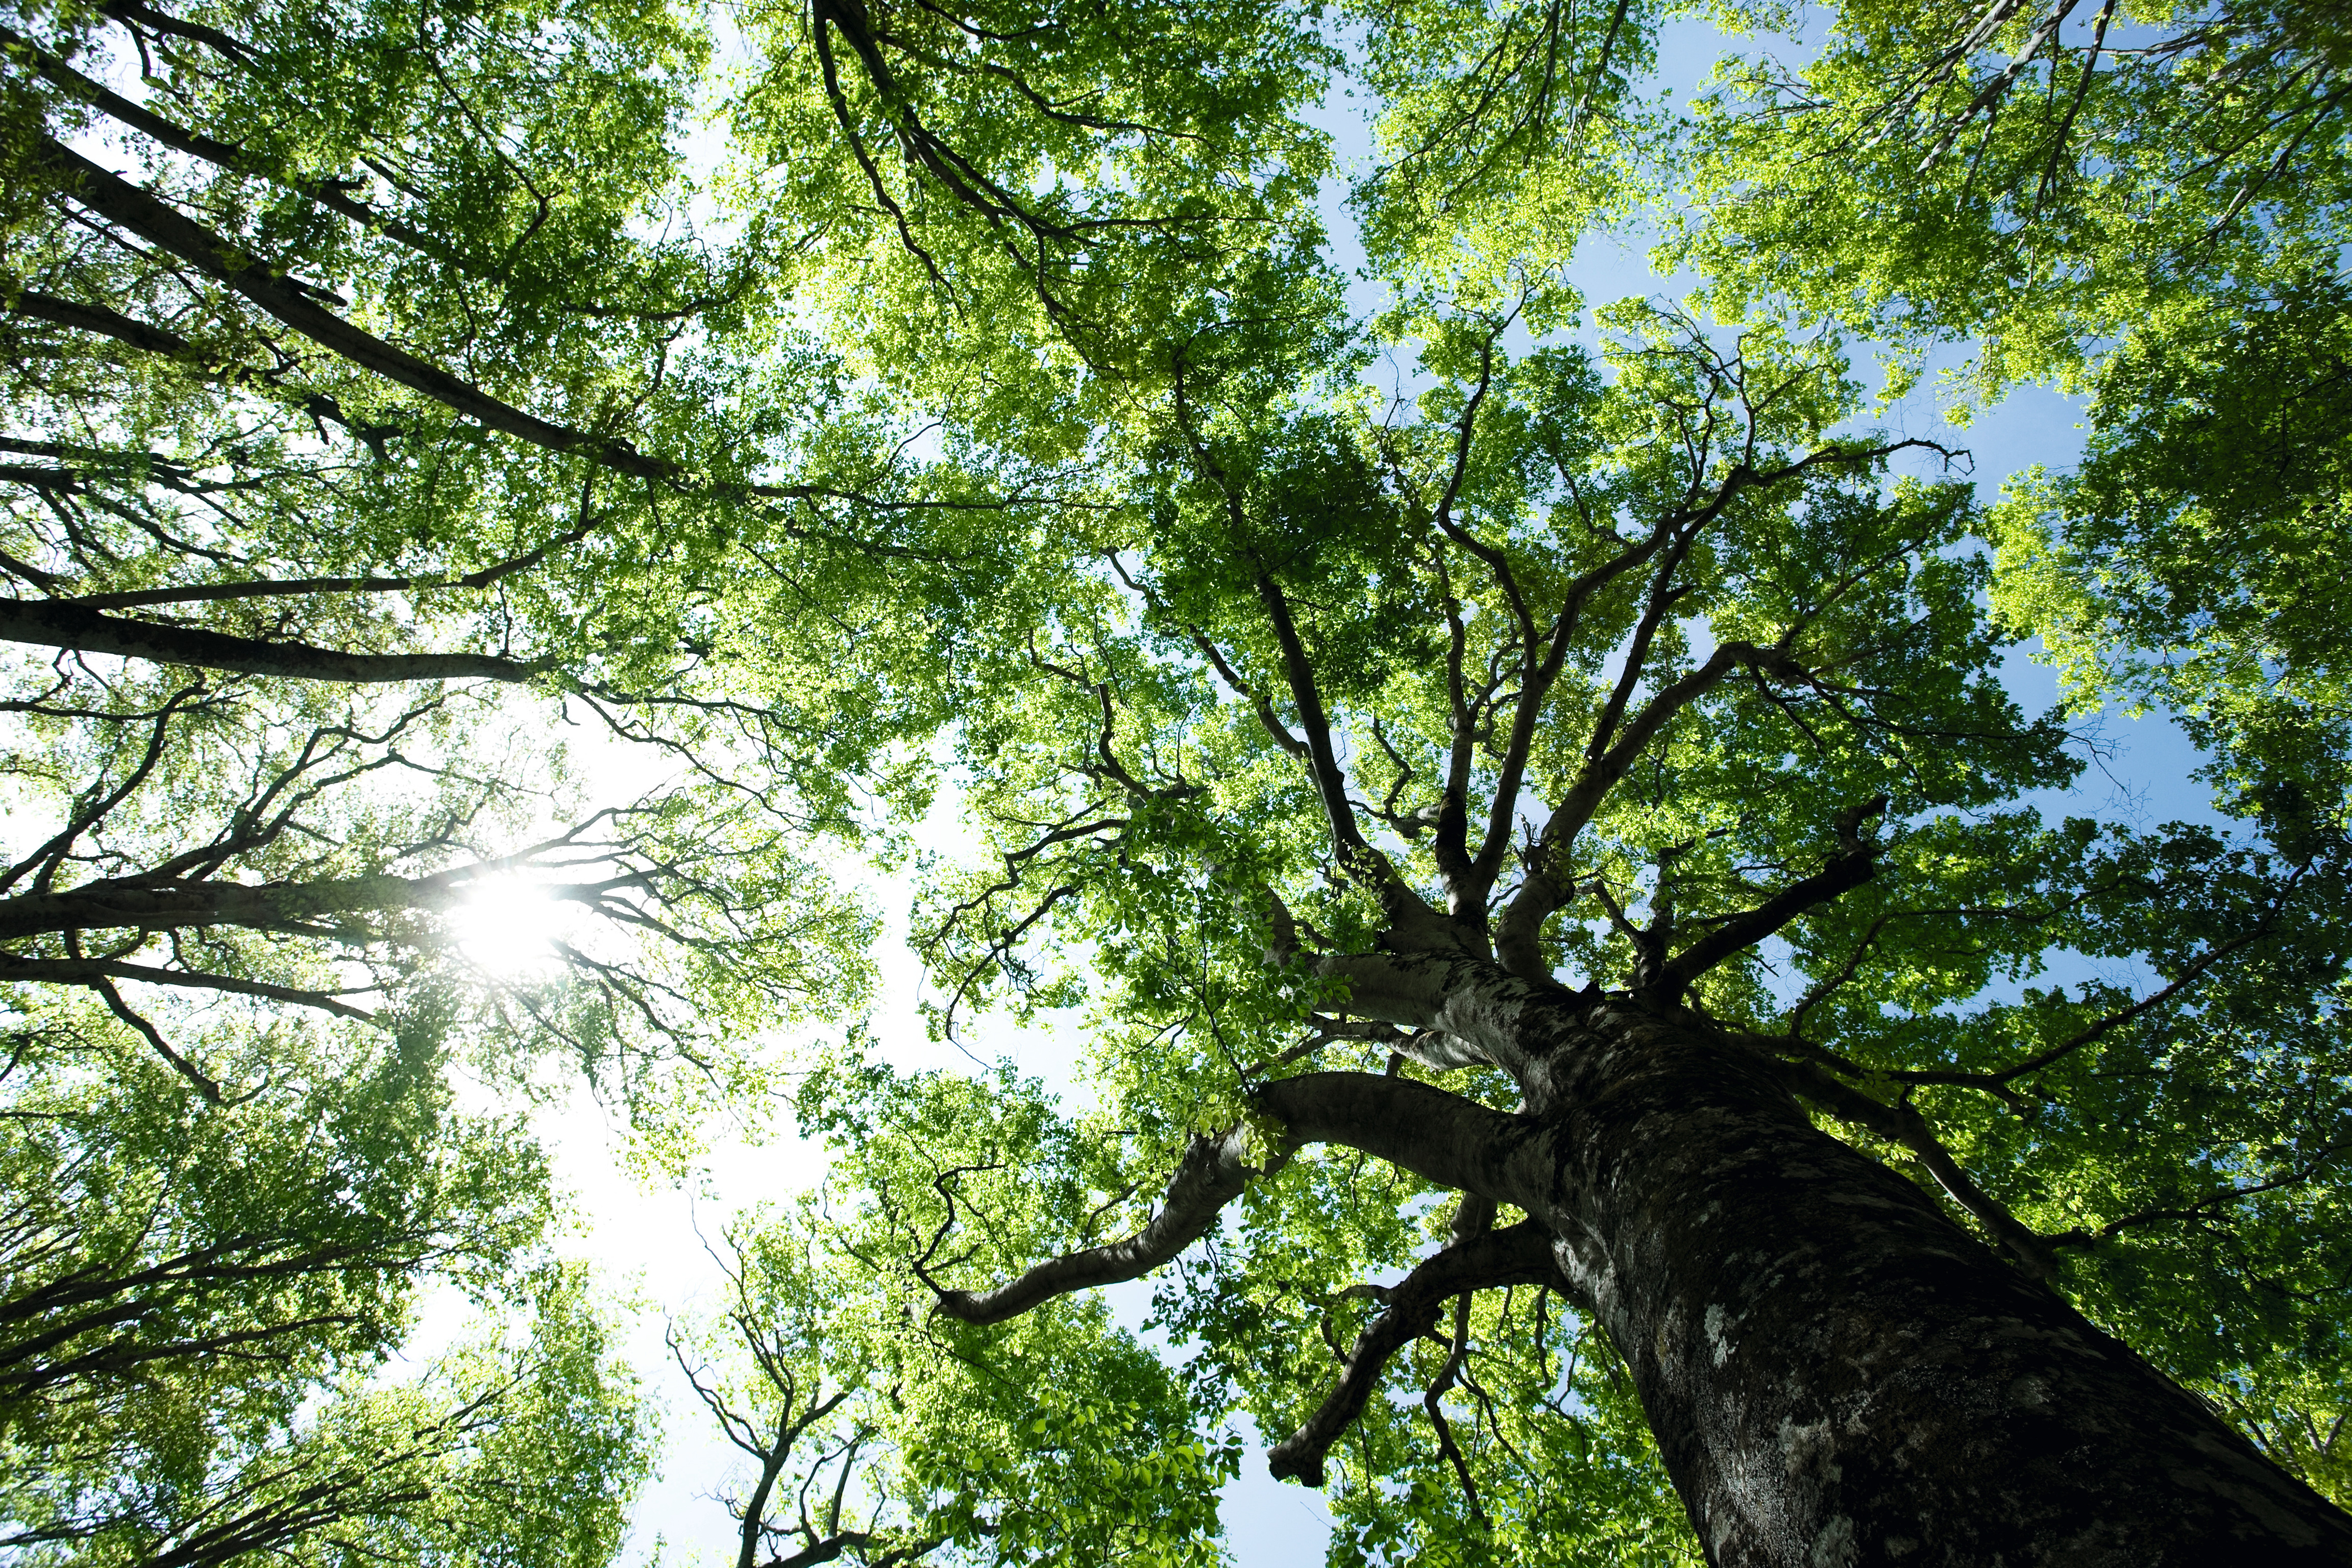 Wood absorbs CO2 from the atmosphere and stores it as carbon.